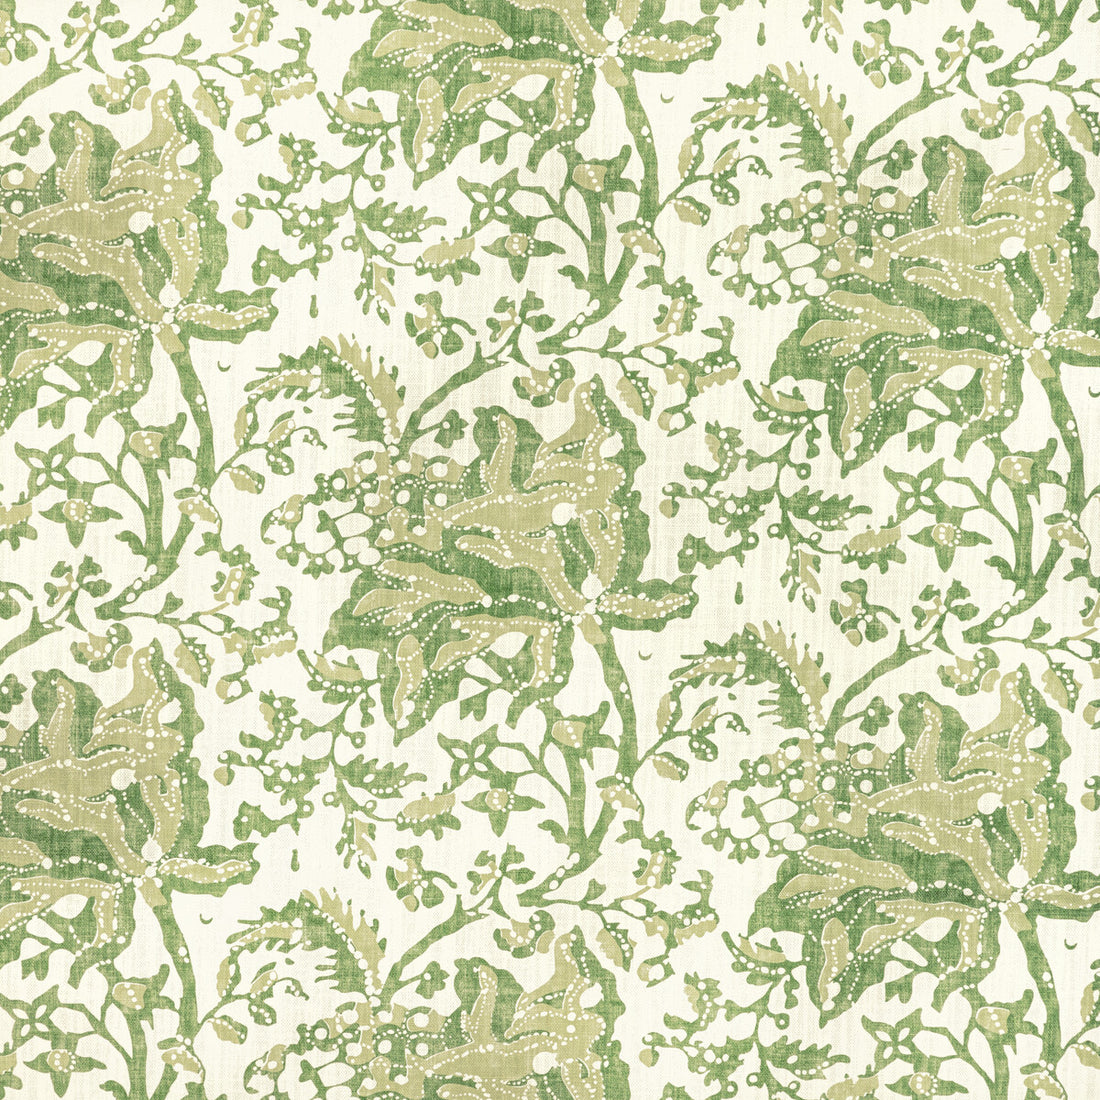 Weymouth Print fabric in leaf color - pattern 8022102.33.0 - by Brunschwig &amp; Fils in the Manoir collection